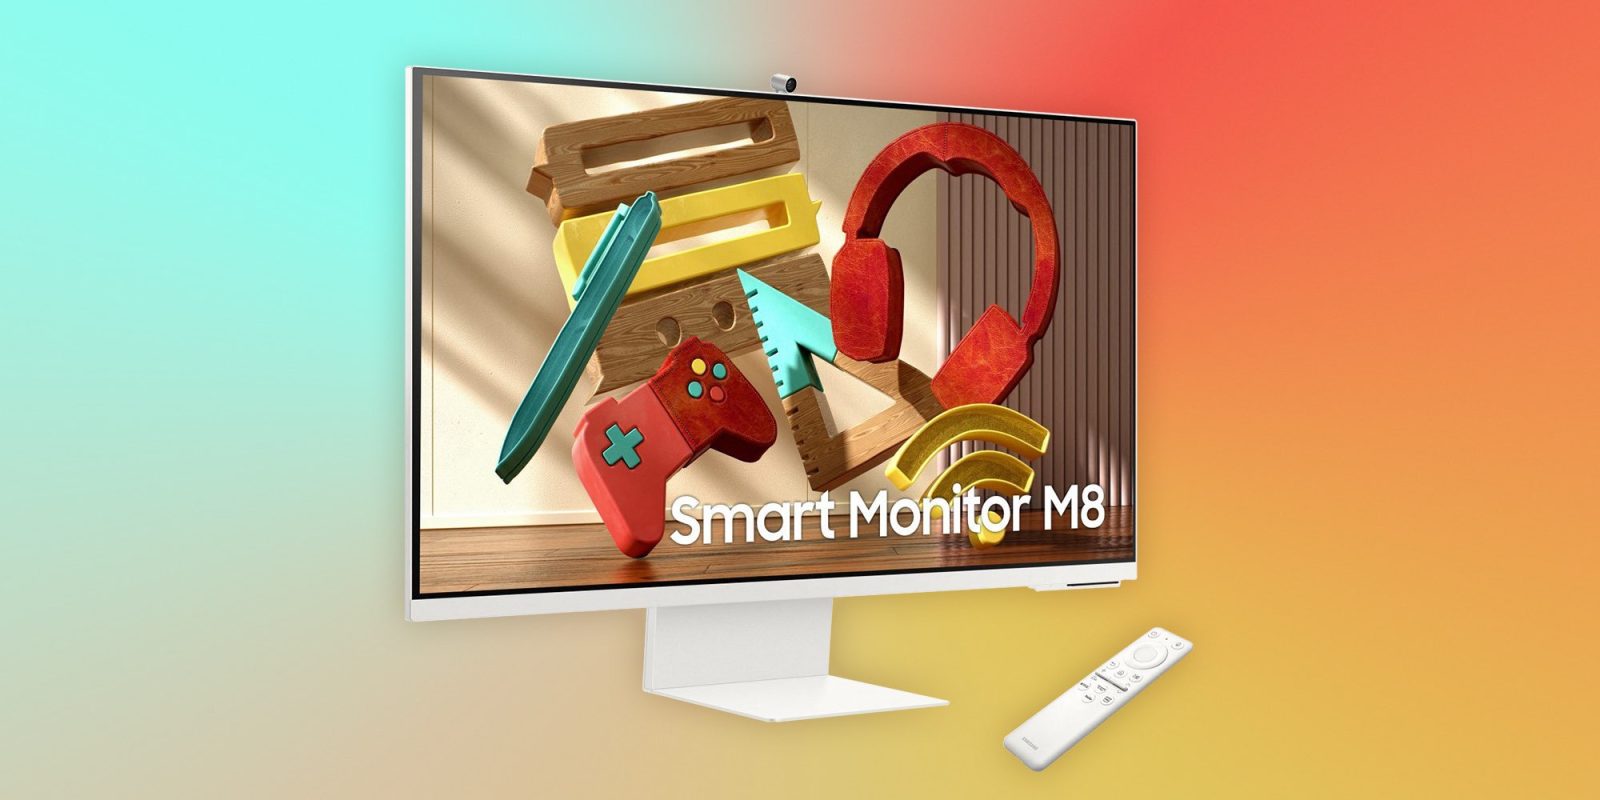 Samsung announces refreshed 32 inch 4k smart monitor with airplay and